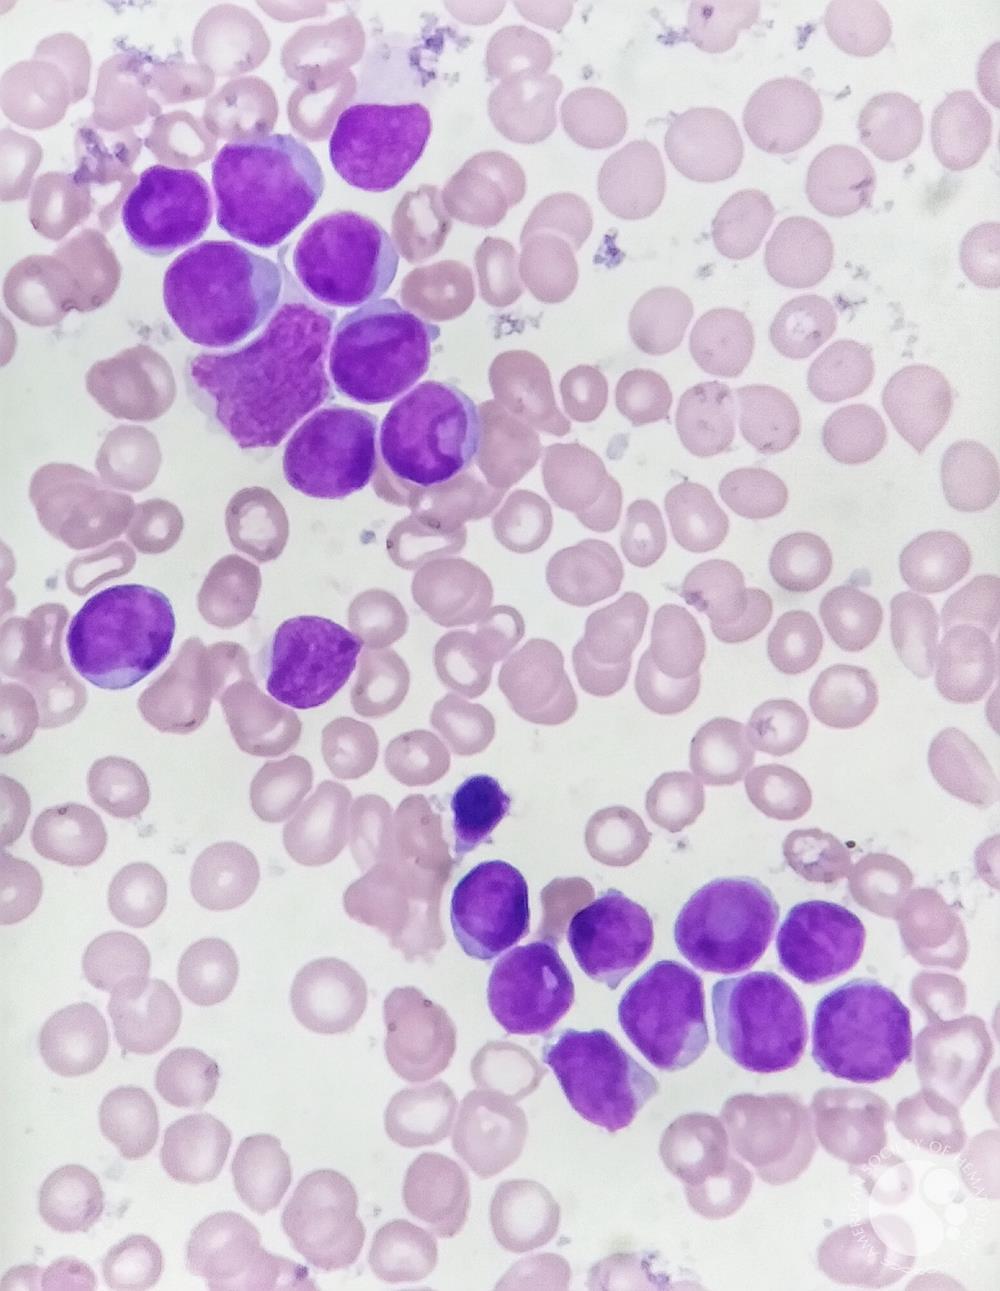 Cup shaped blasts in AML with mutated NPM1 and FLT3